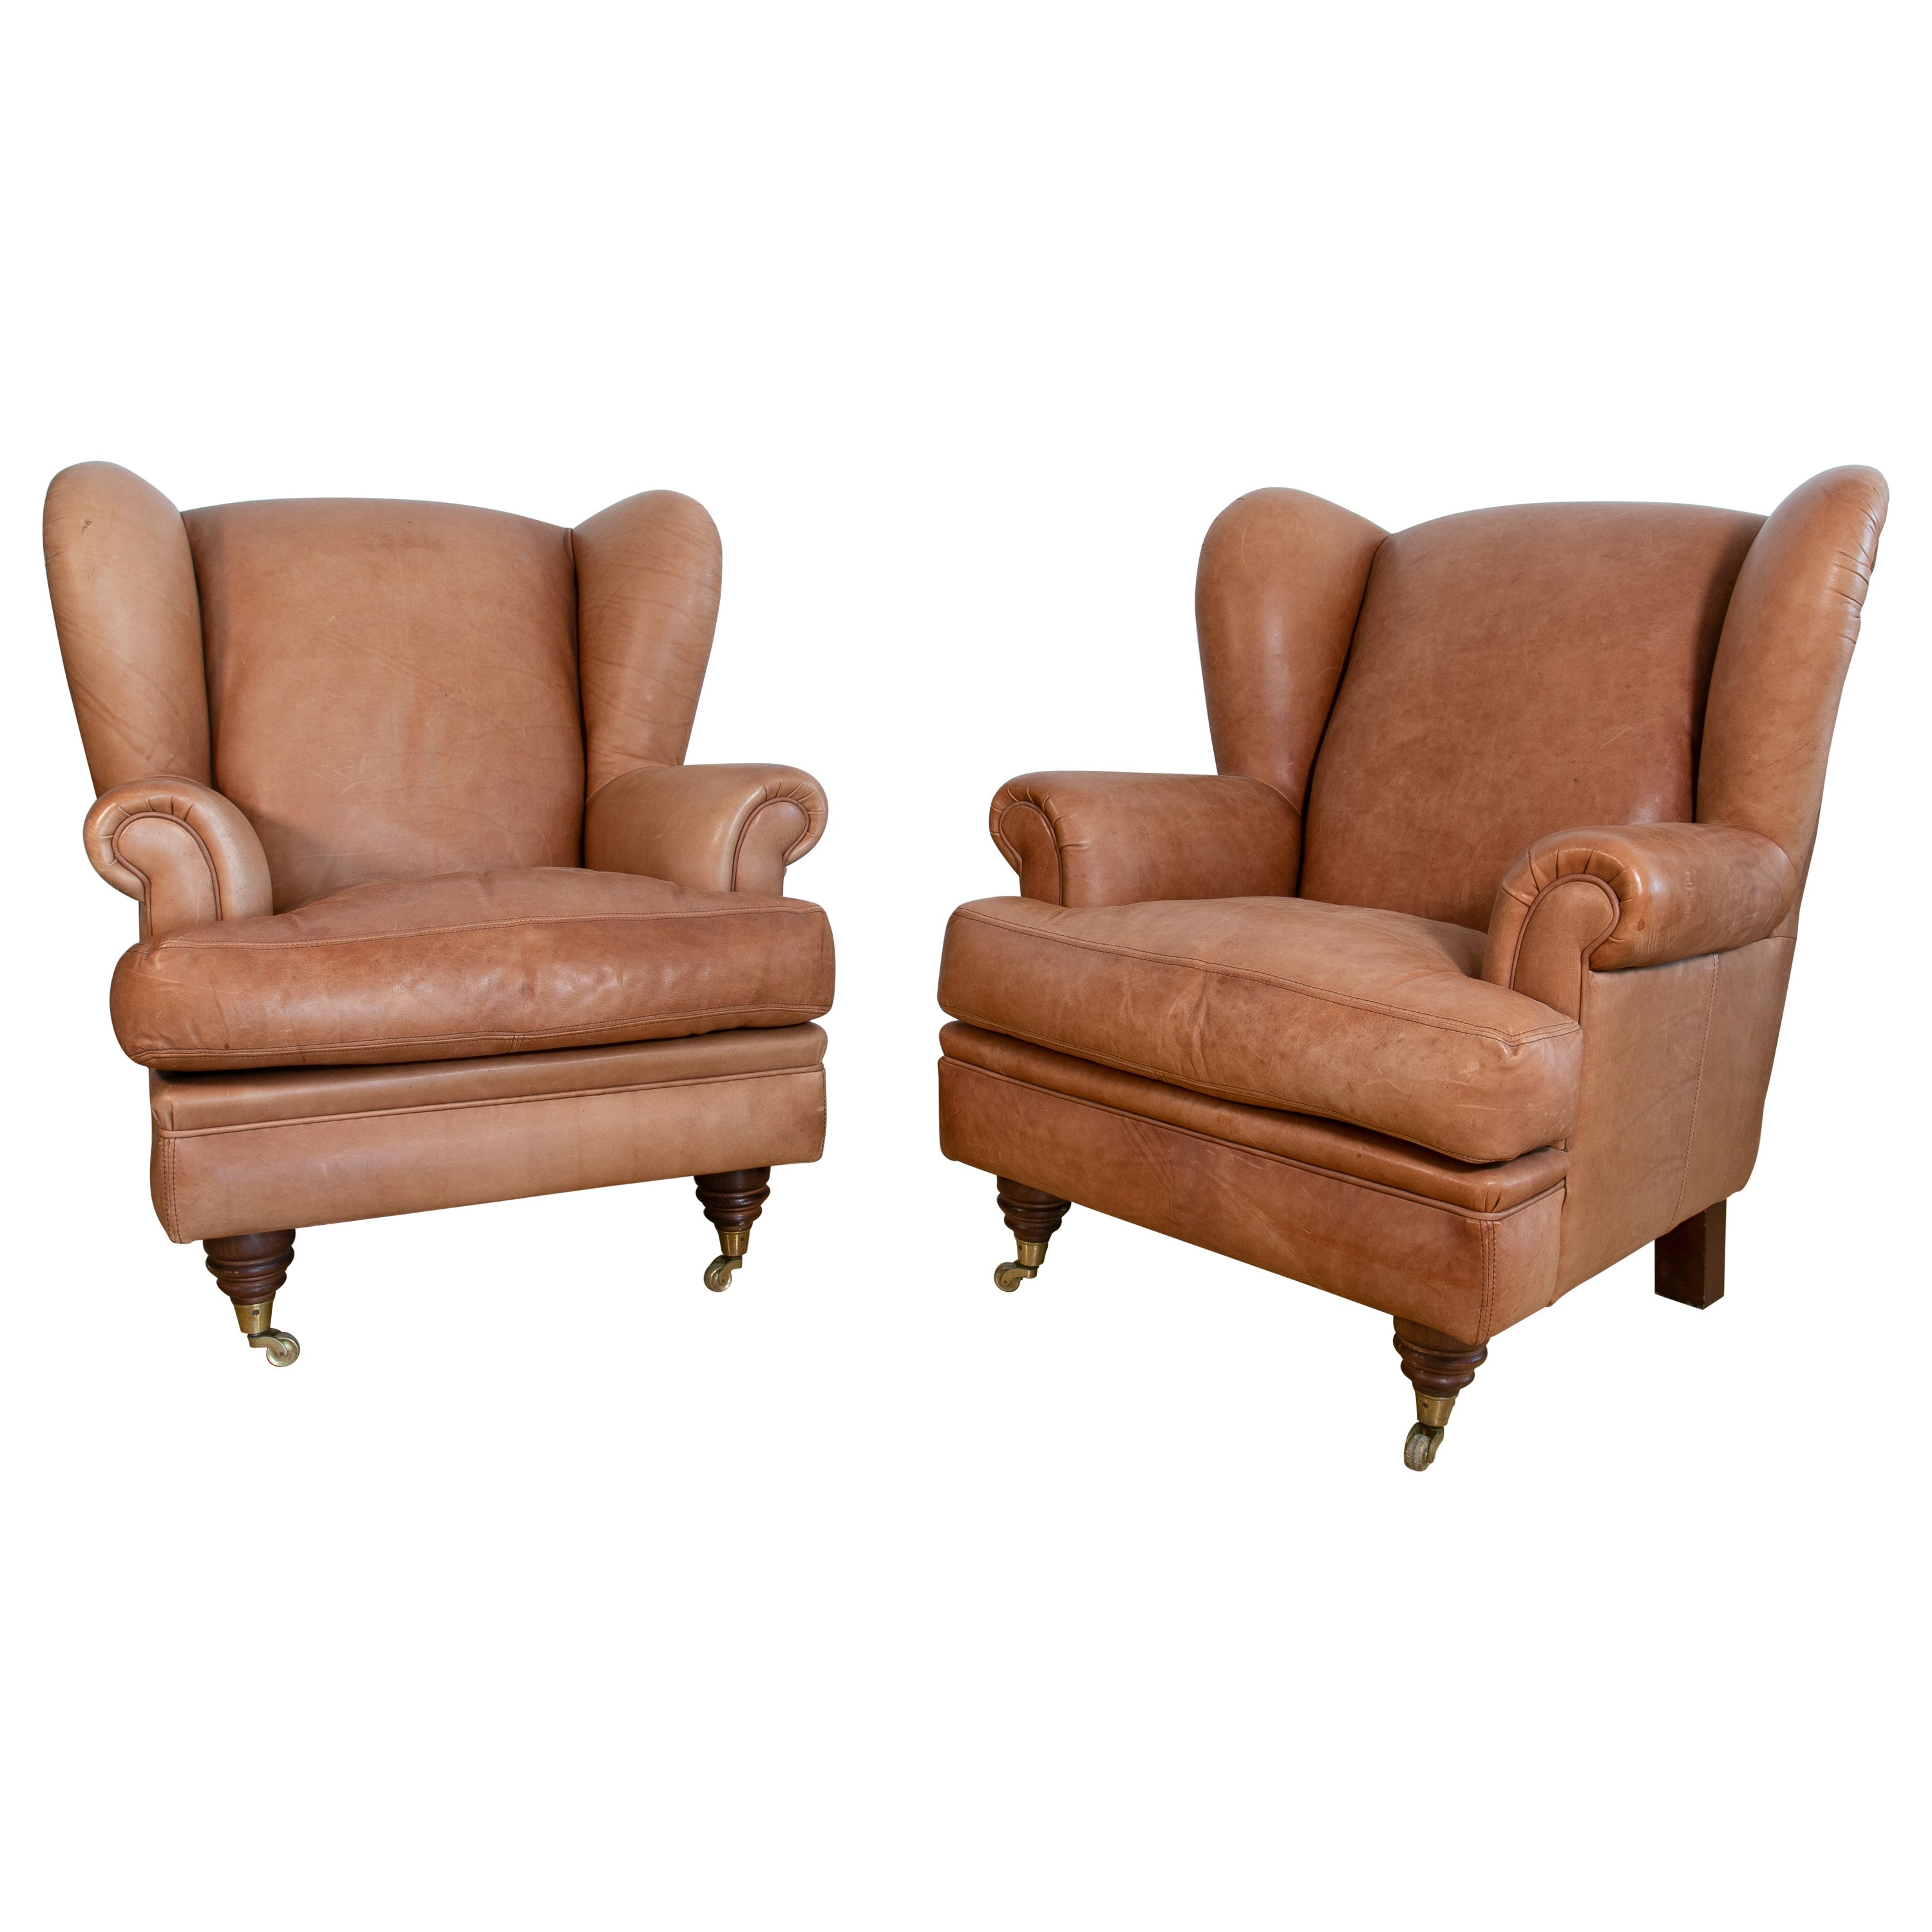 Pair of Brown Leather Armchairs with Wooden Legs and Brass Wheels